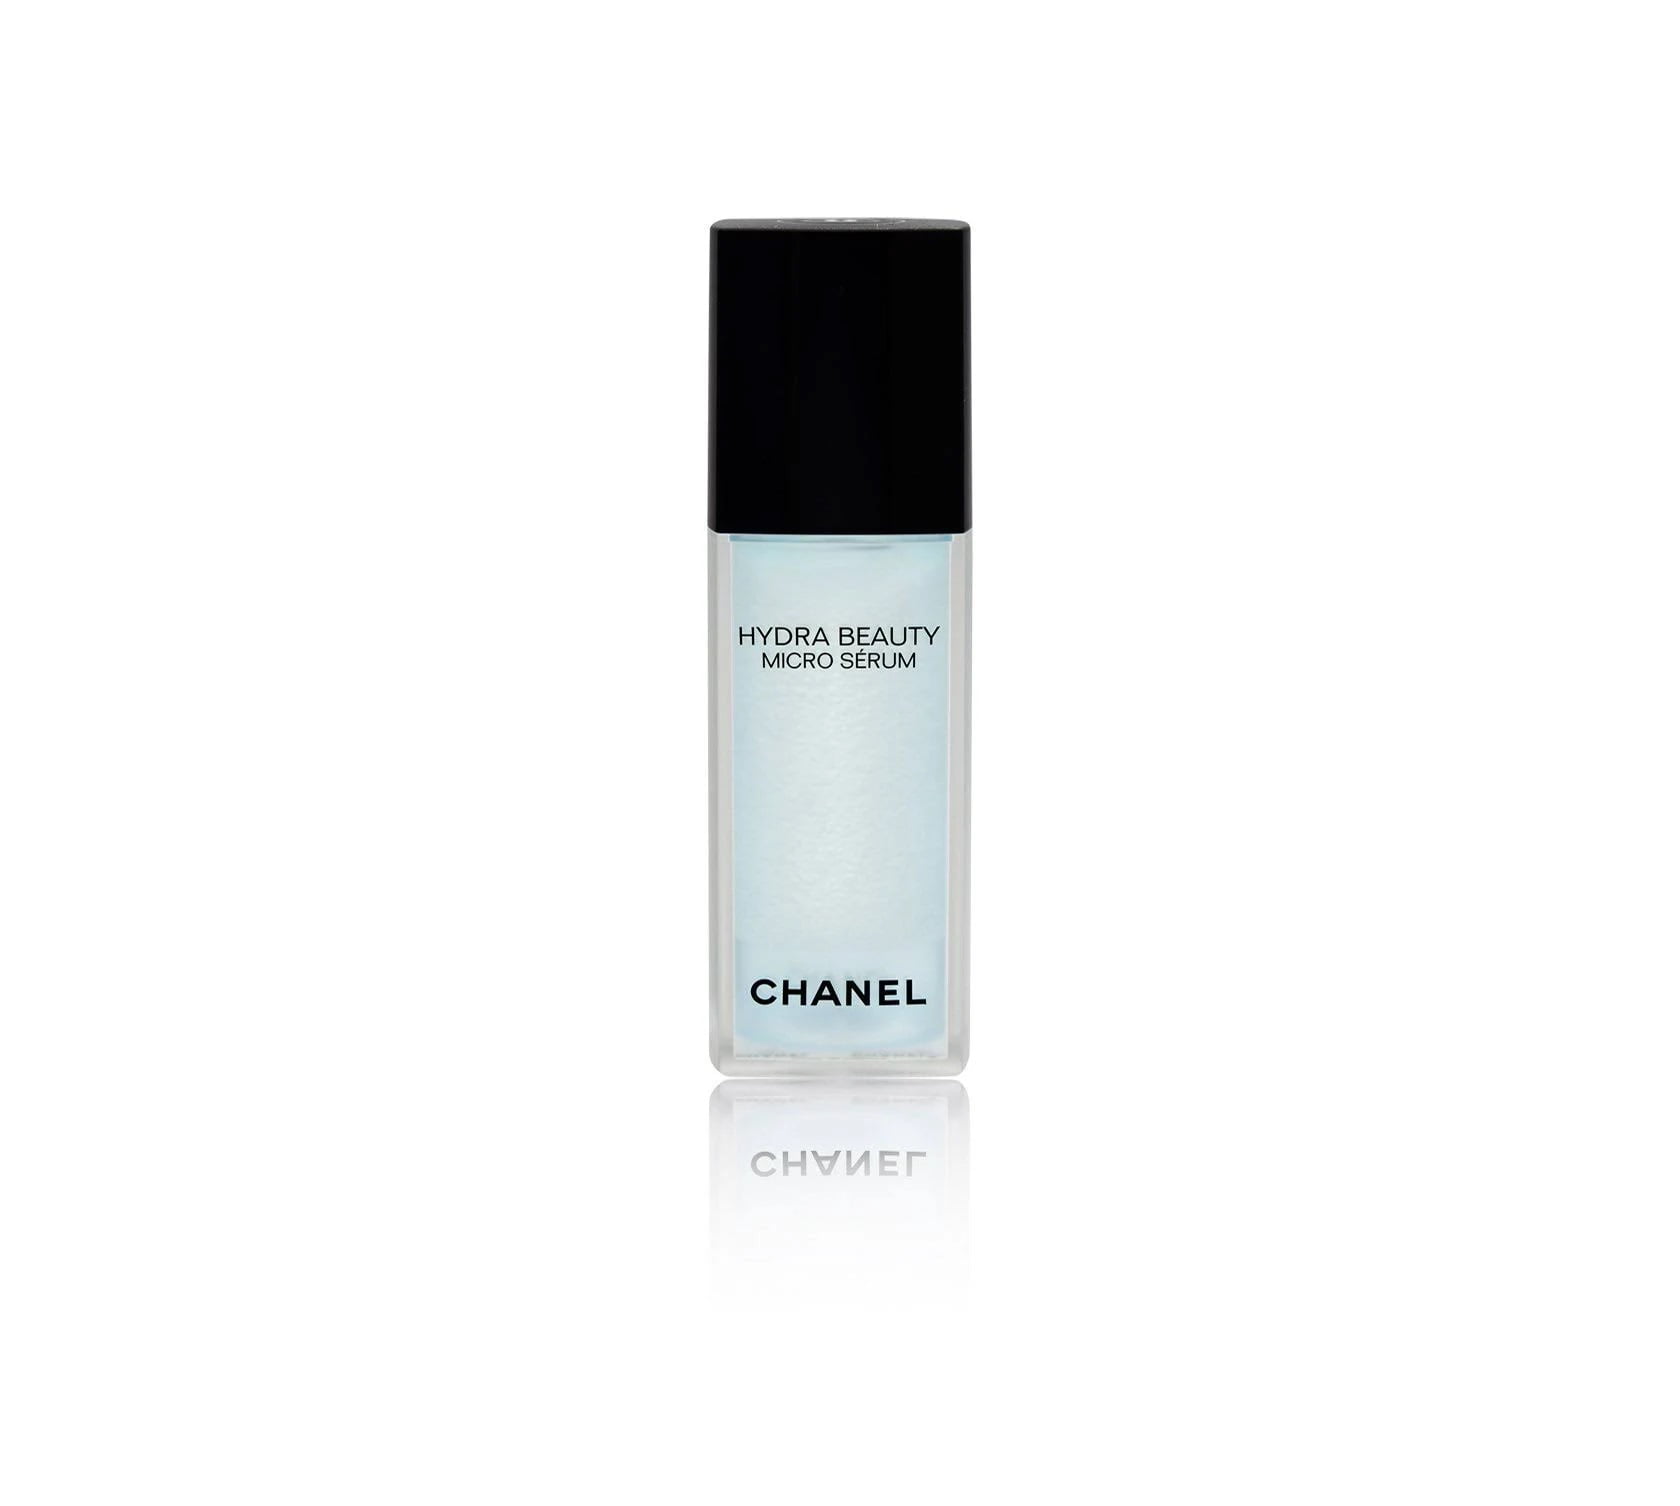 Chanel offers its most intense skin hydration formula yet